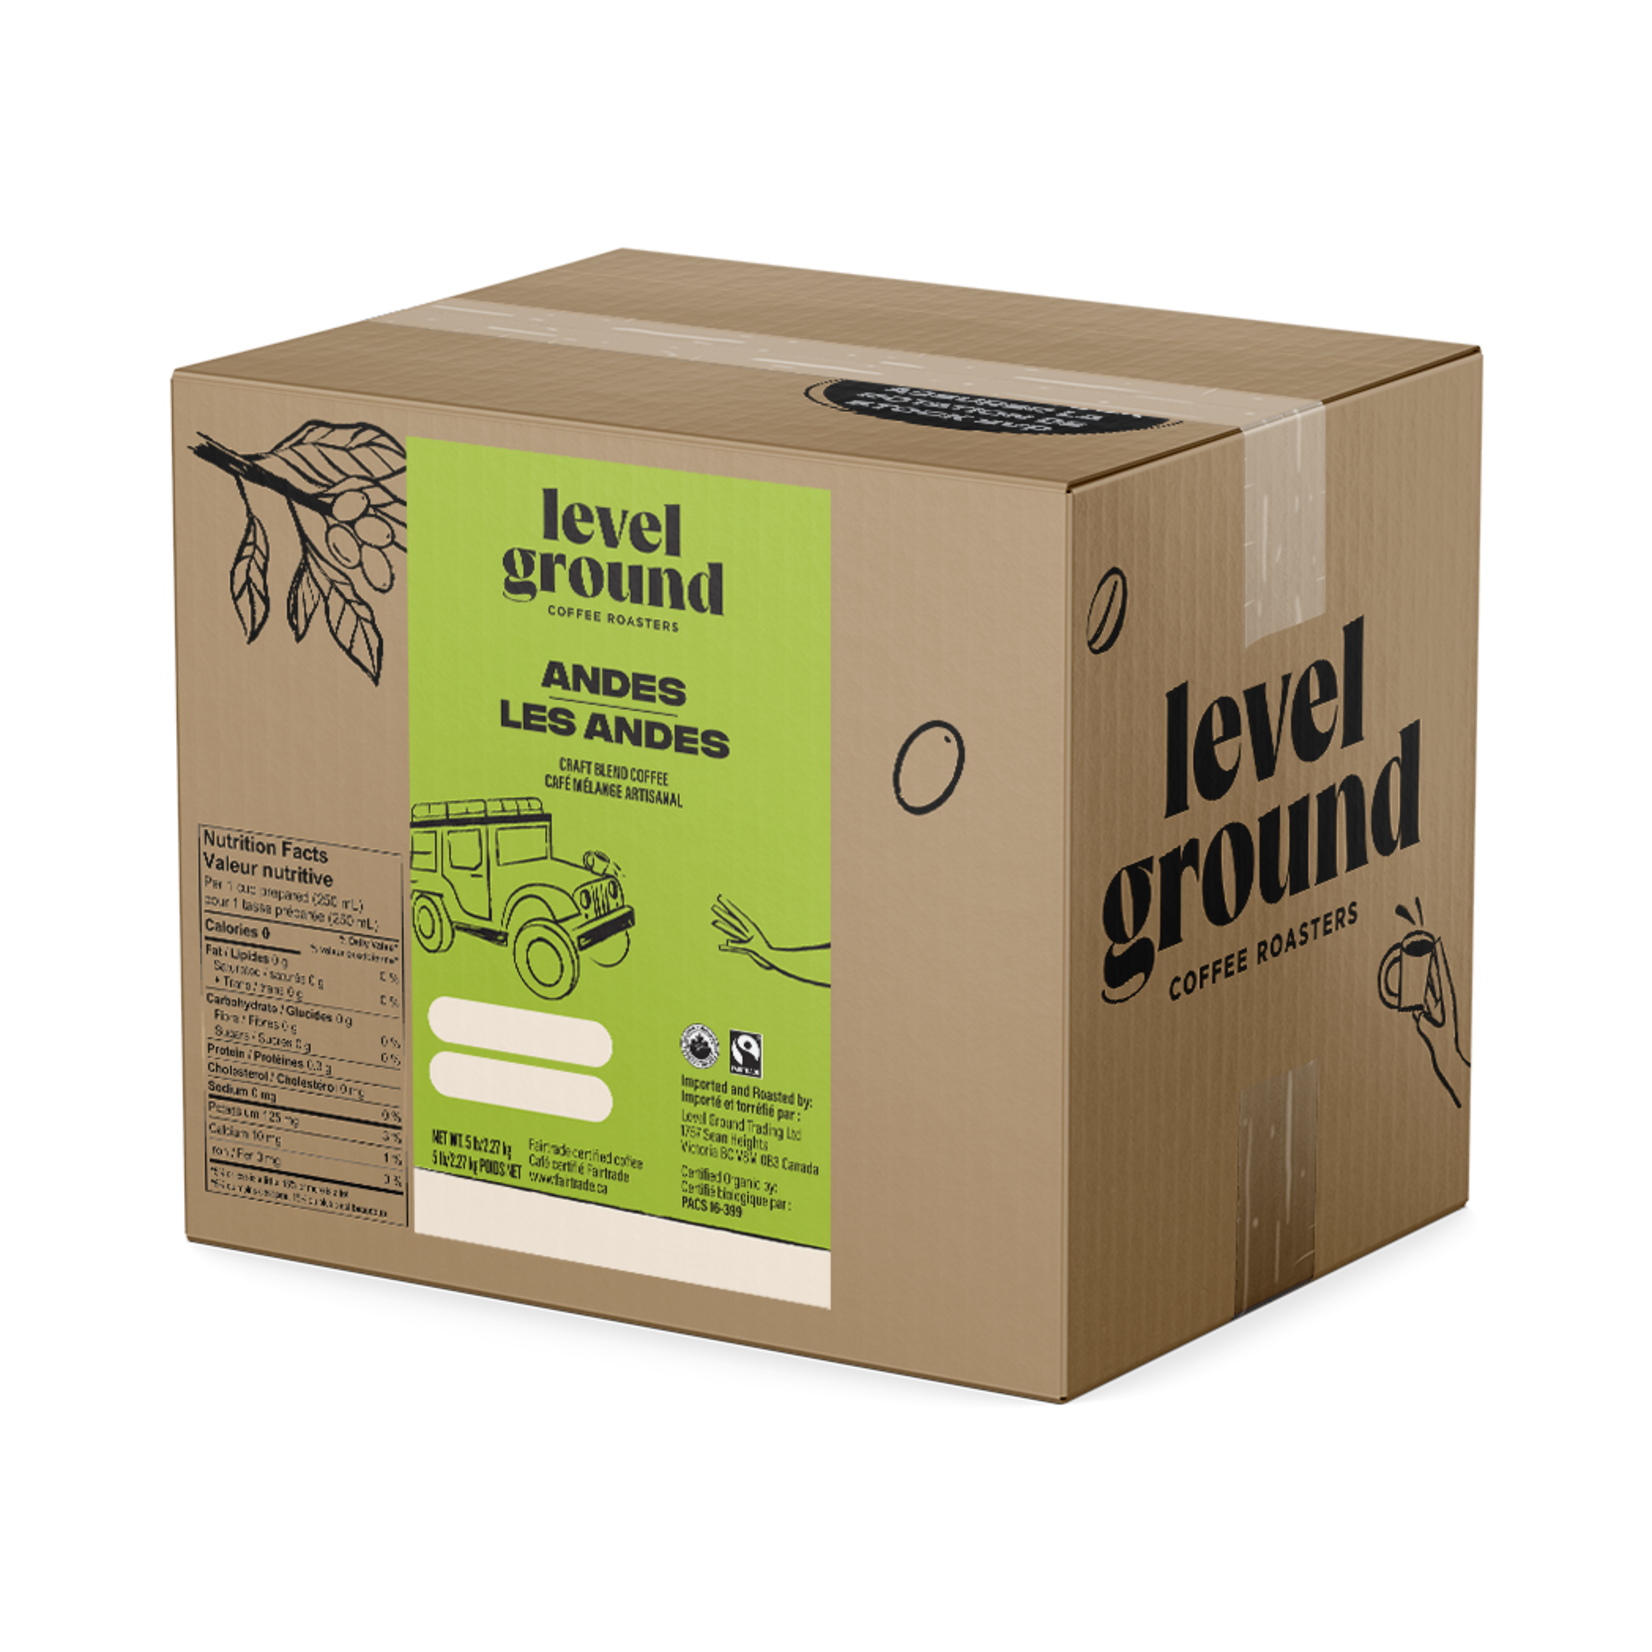 Level Ground Coffee - Level Ground Andes Mountain Ground - 5lb Box